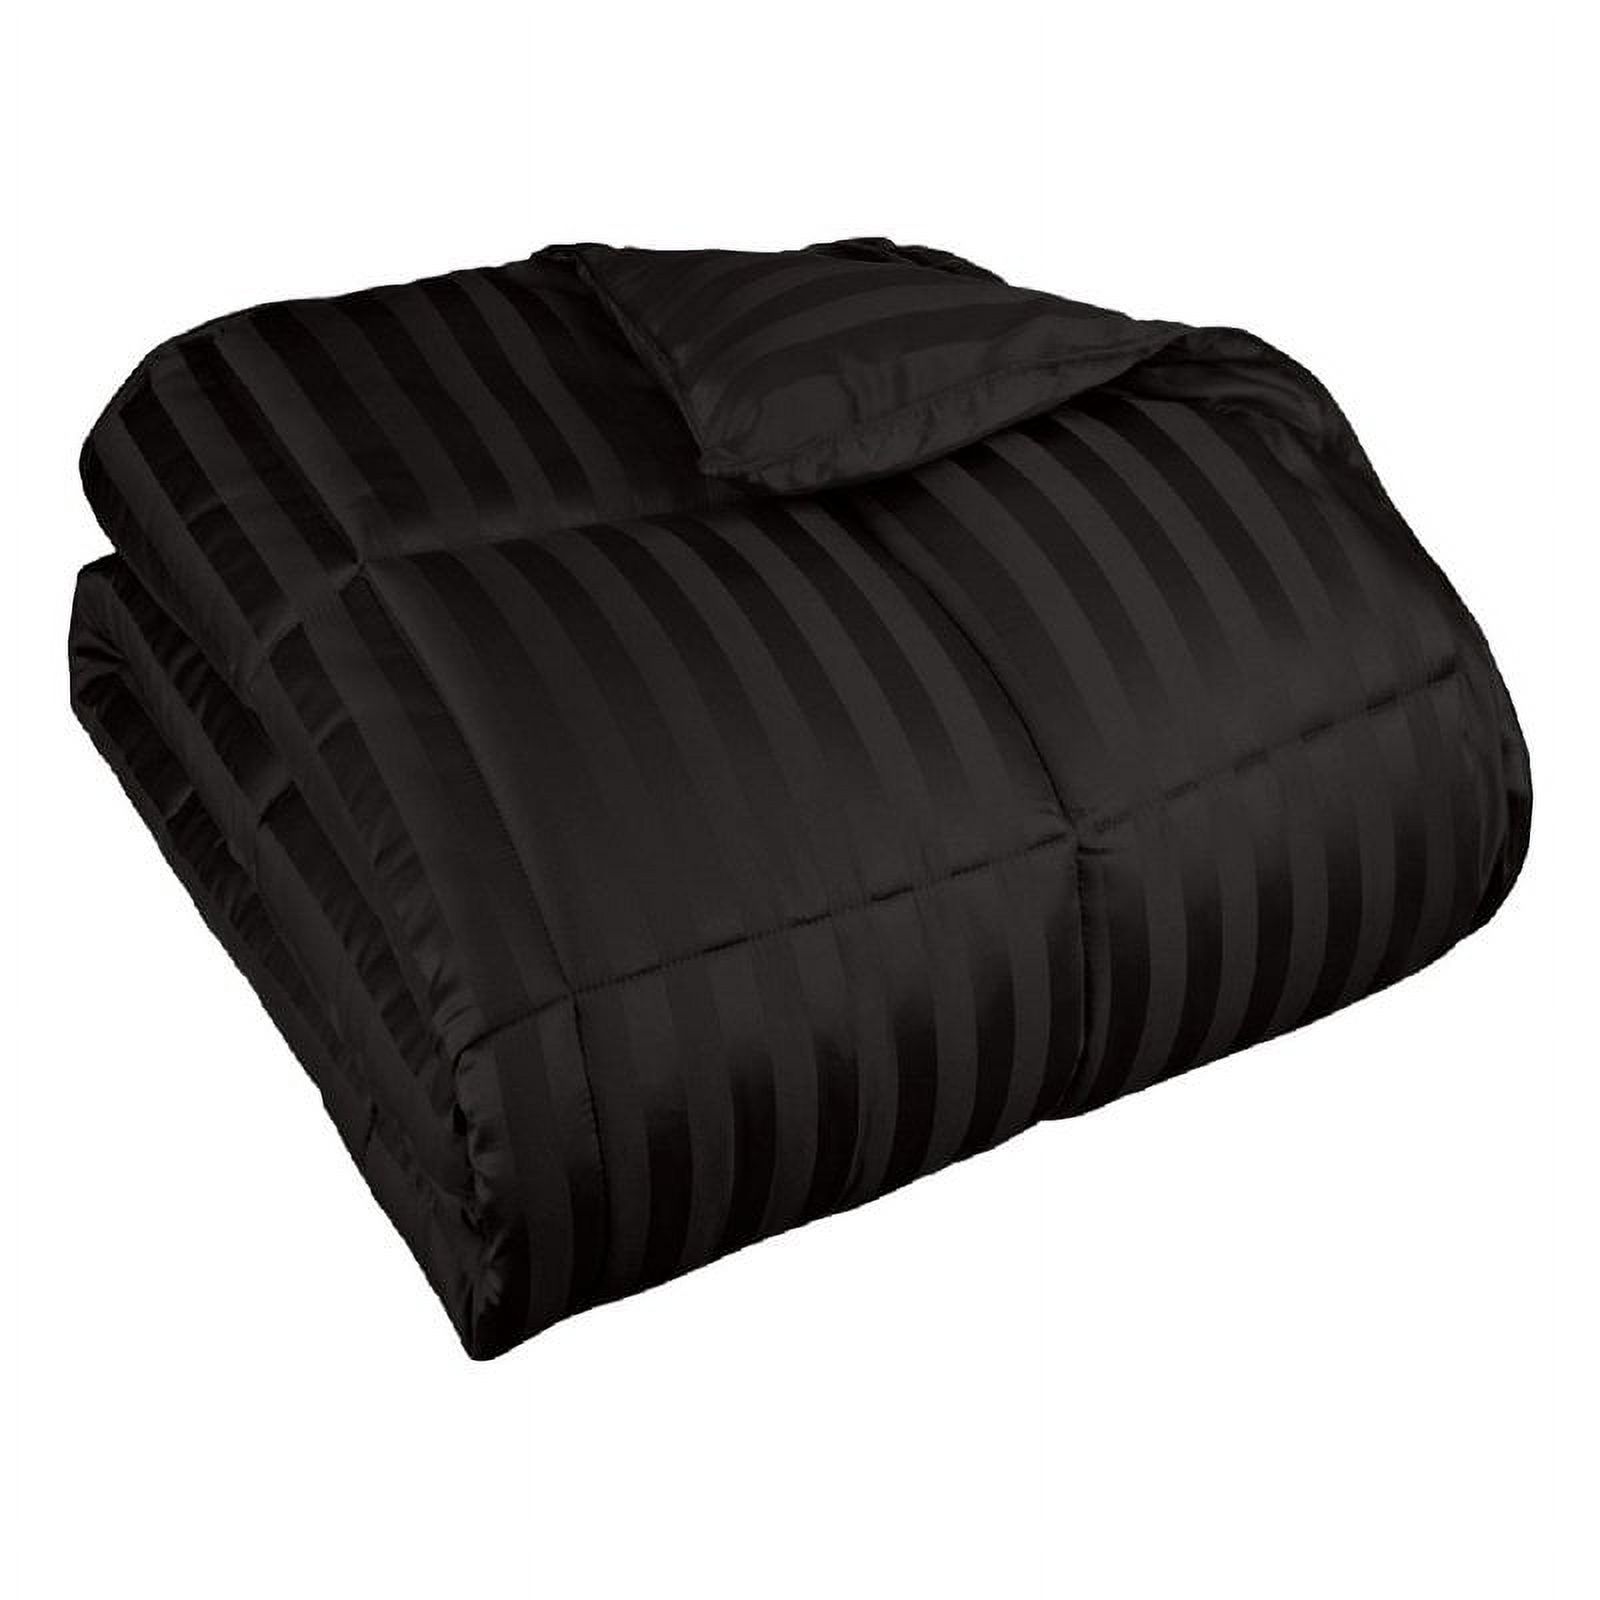 Superior Striped Reversible Down Alternative Comforter, Twin/ Twin XL, Black - image 1 of 2